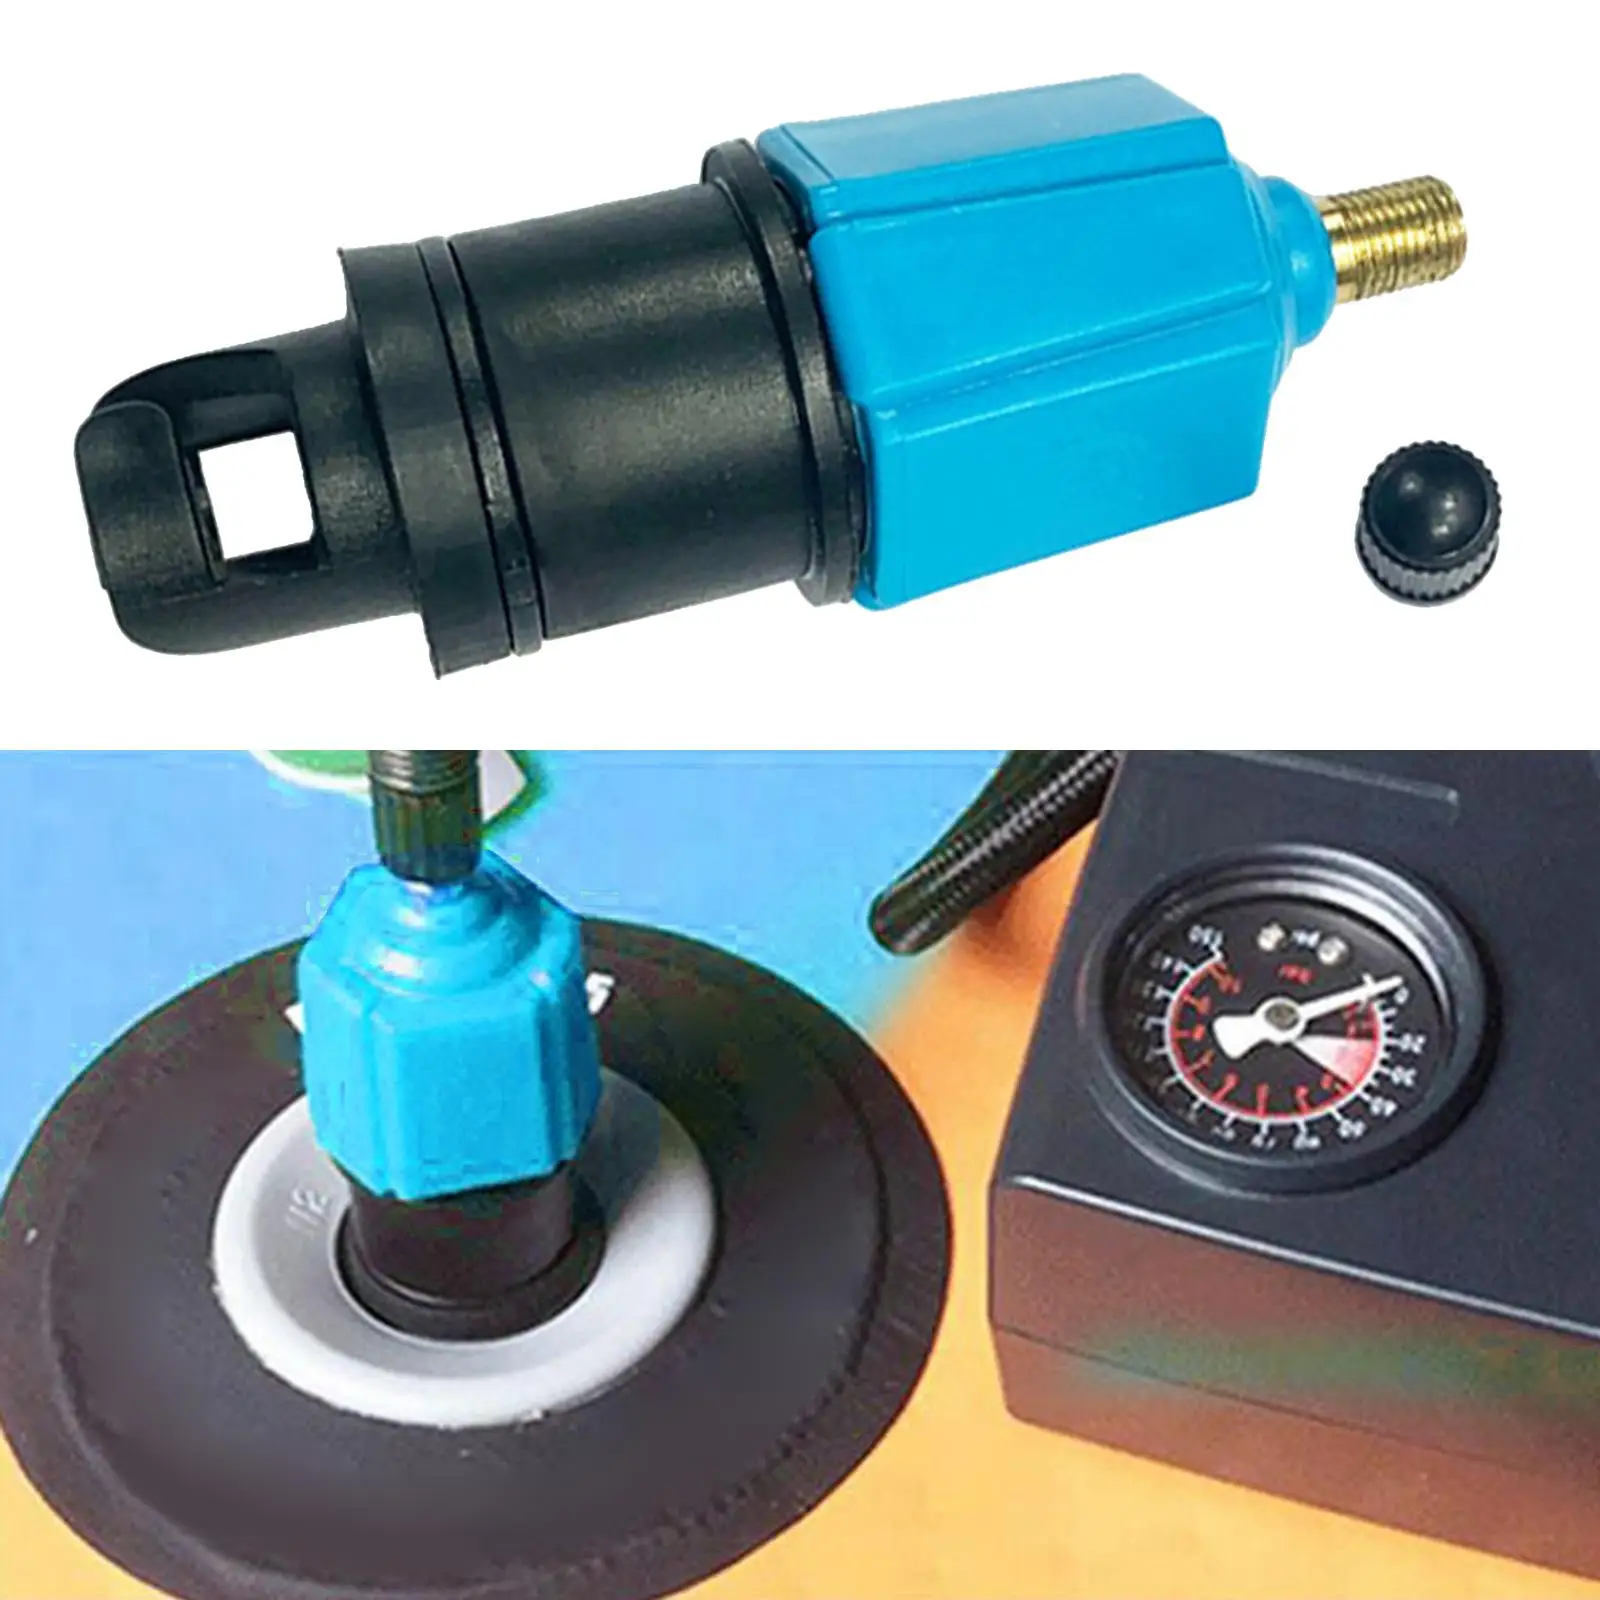 Air Valve Adaptor Wear-Resistant Pumping Nozzle for Kayak Boat Accessory